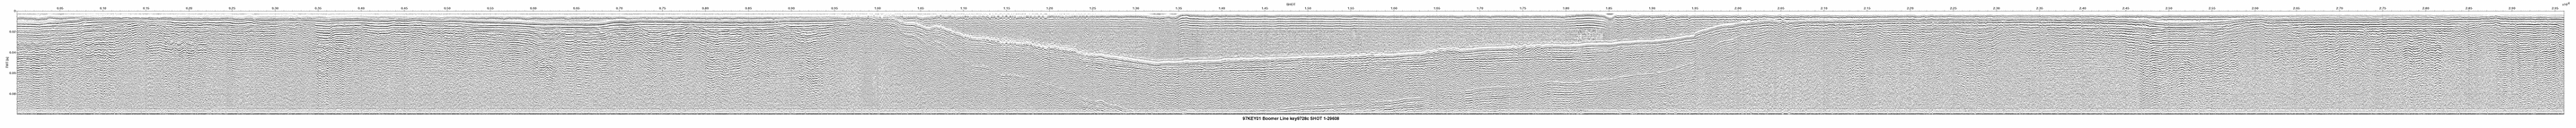 Thumbnail GIF image of the seismic trackline key9728c, with a hotlink to the more detailed, larger JPG image.